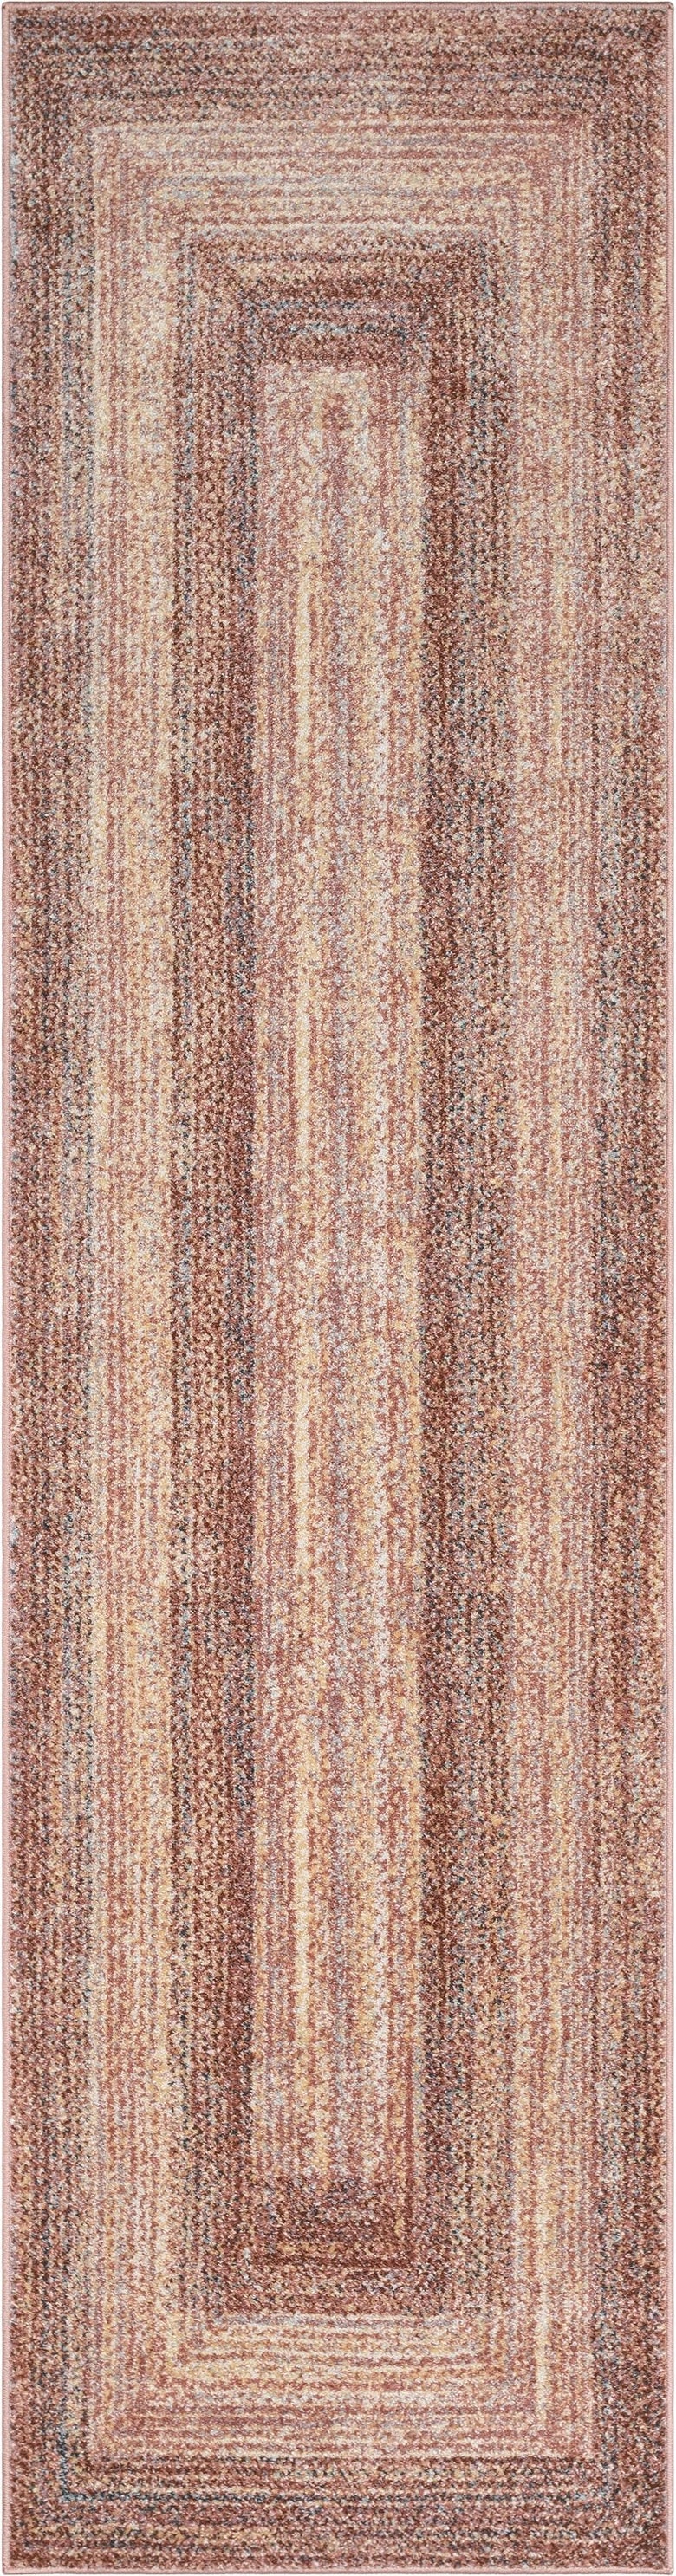 Chindi Bohemian Vintage Solid & Striped Multi-Color Blush Yellow Braided Pattern Rug RO-311